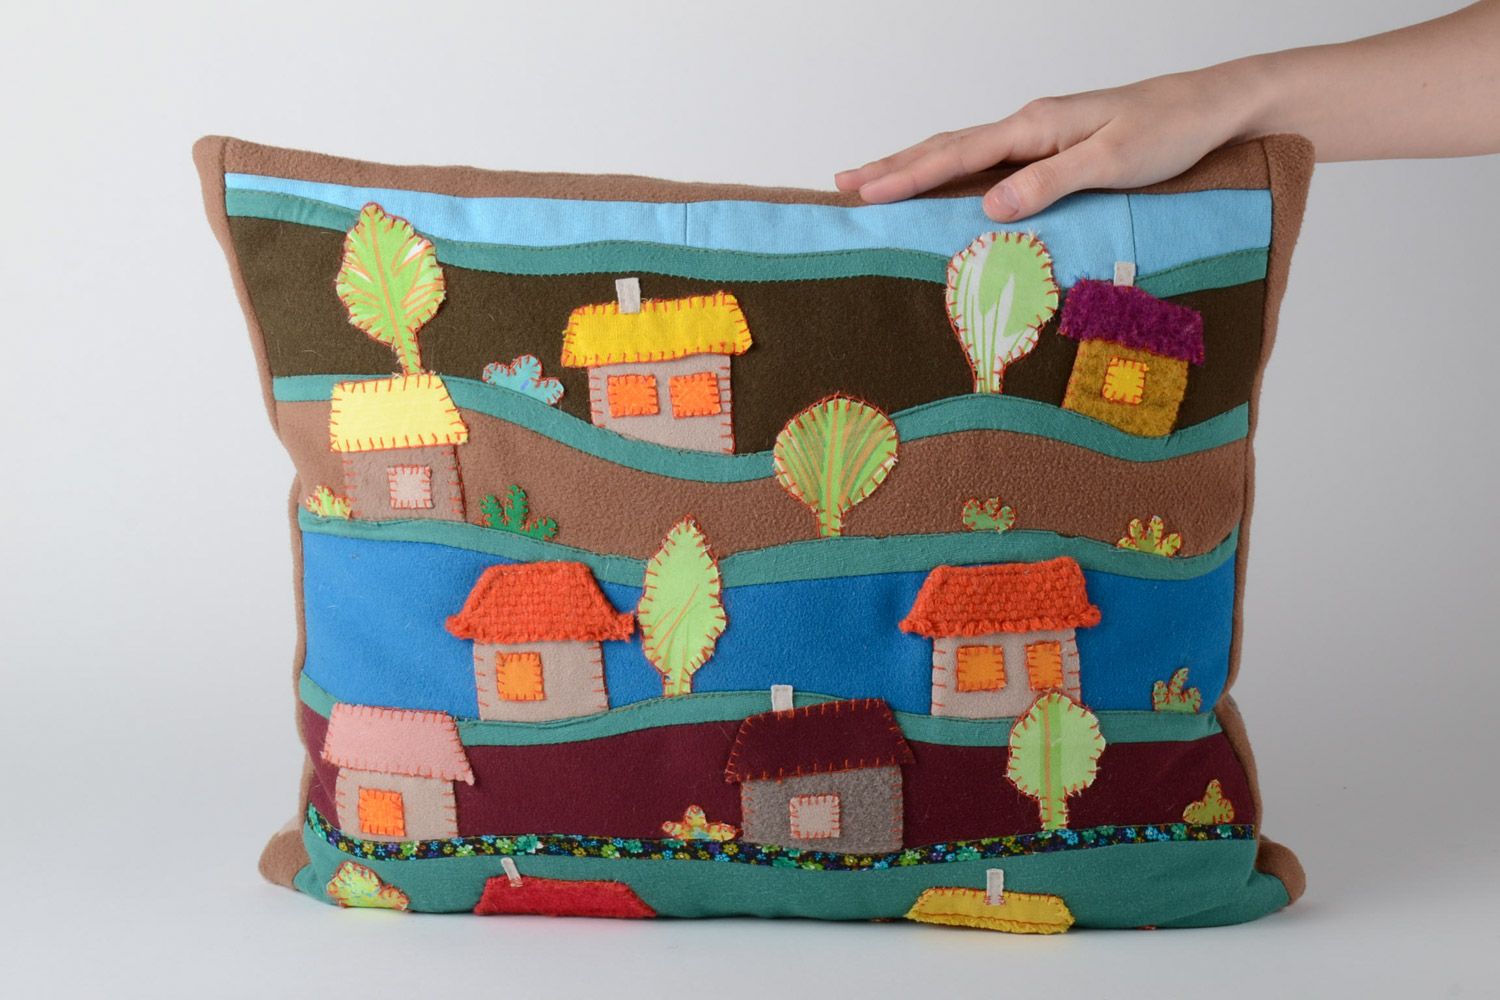 Bright handmade soft cushion with applique work for children's room photo 5